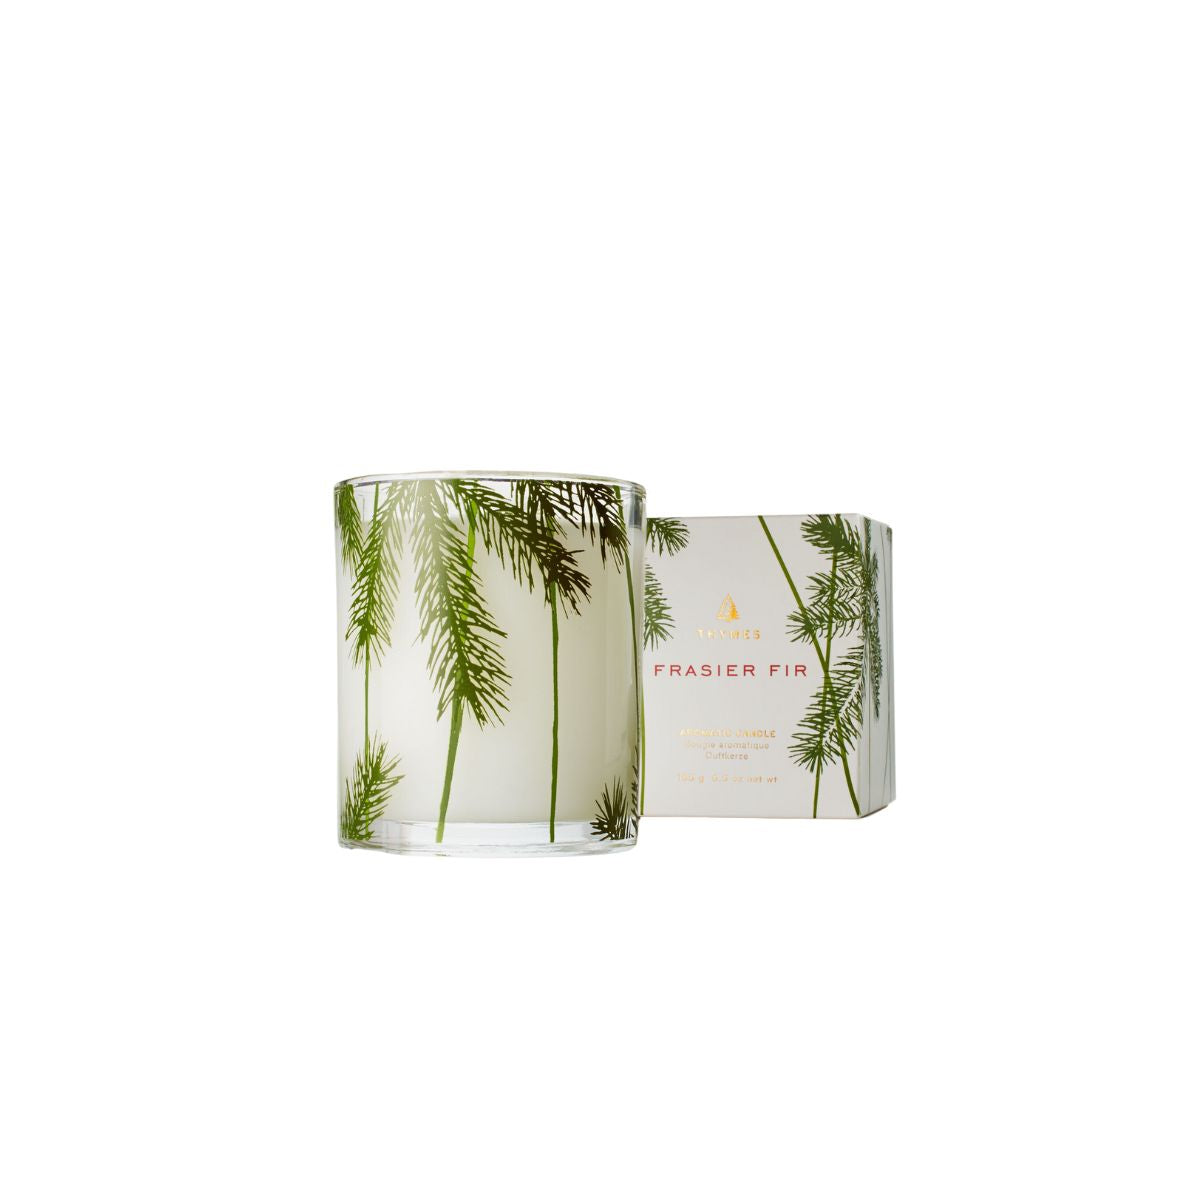 Thymes Frasier Fir Poured Candle, Pine Needle Design